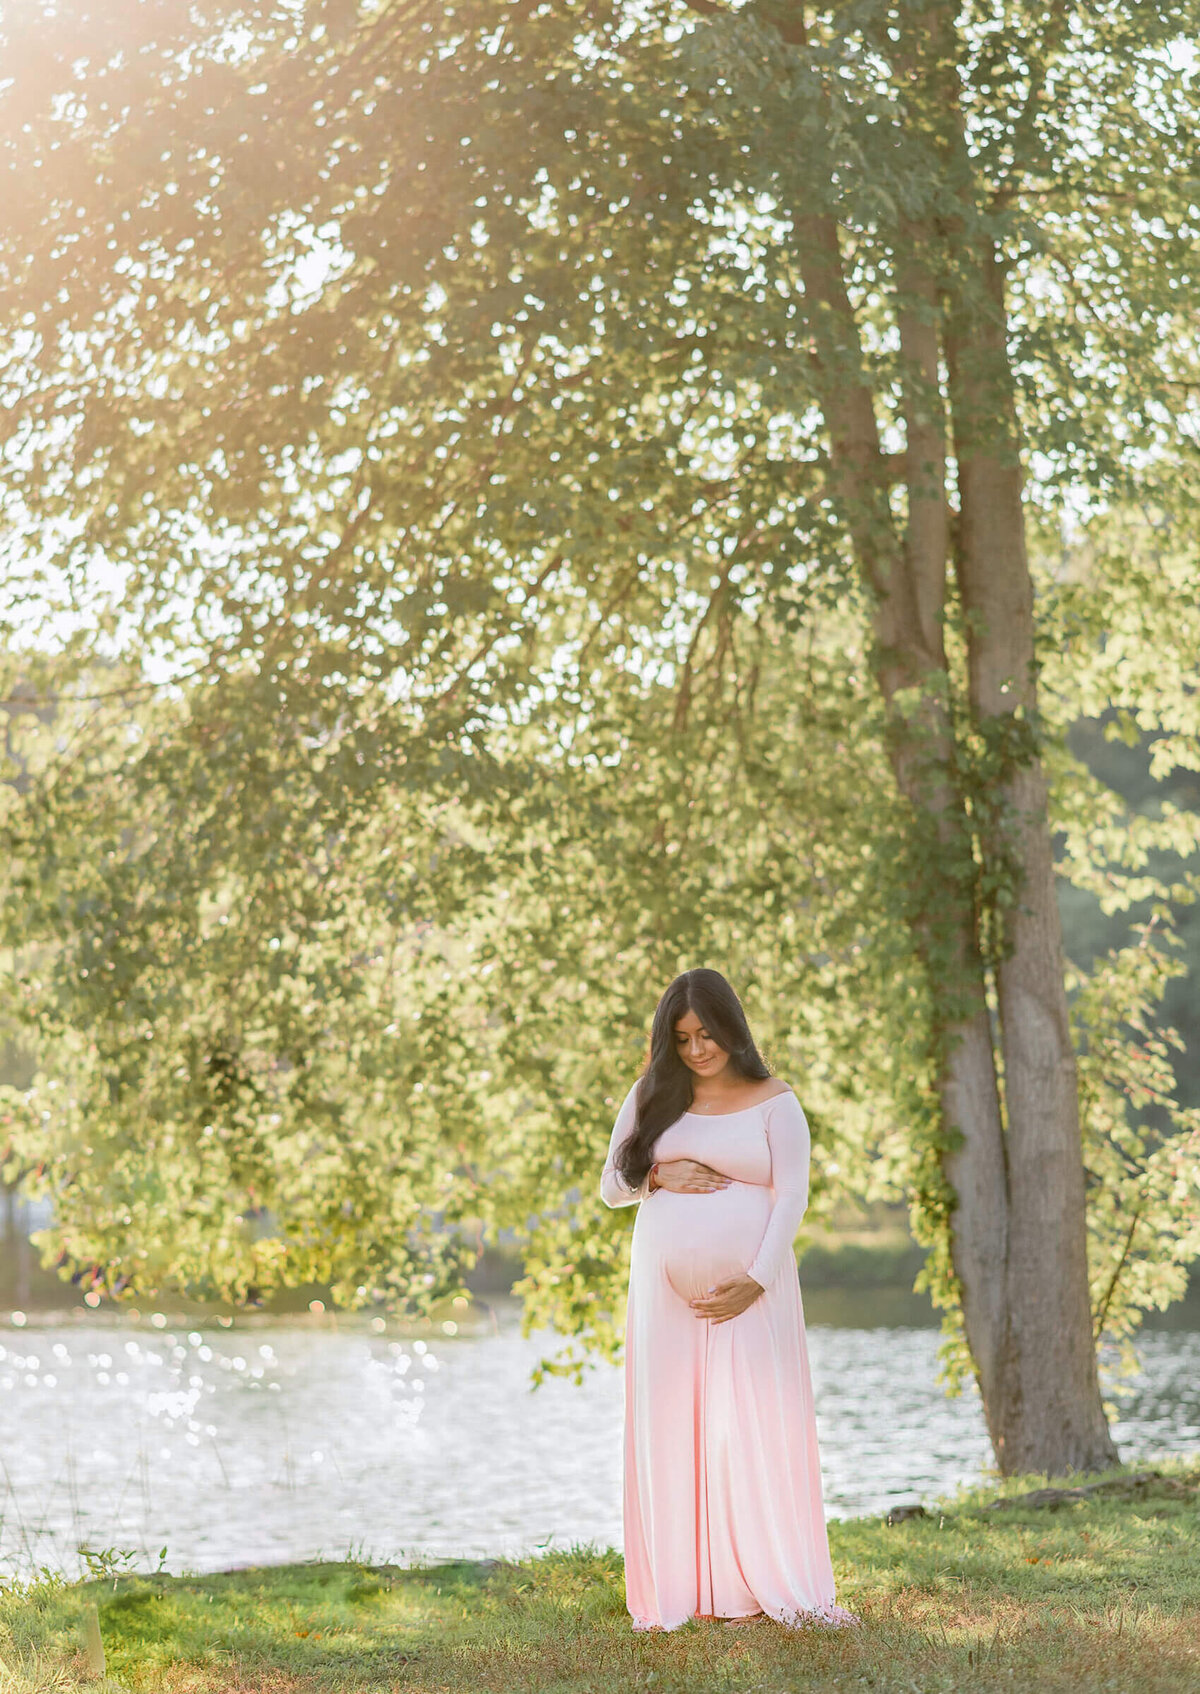 gorgeous mom to be standing near a tree on a sunny summer day, the wind moves her hair and dress, she is smiling and looking down at her belly